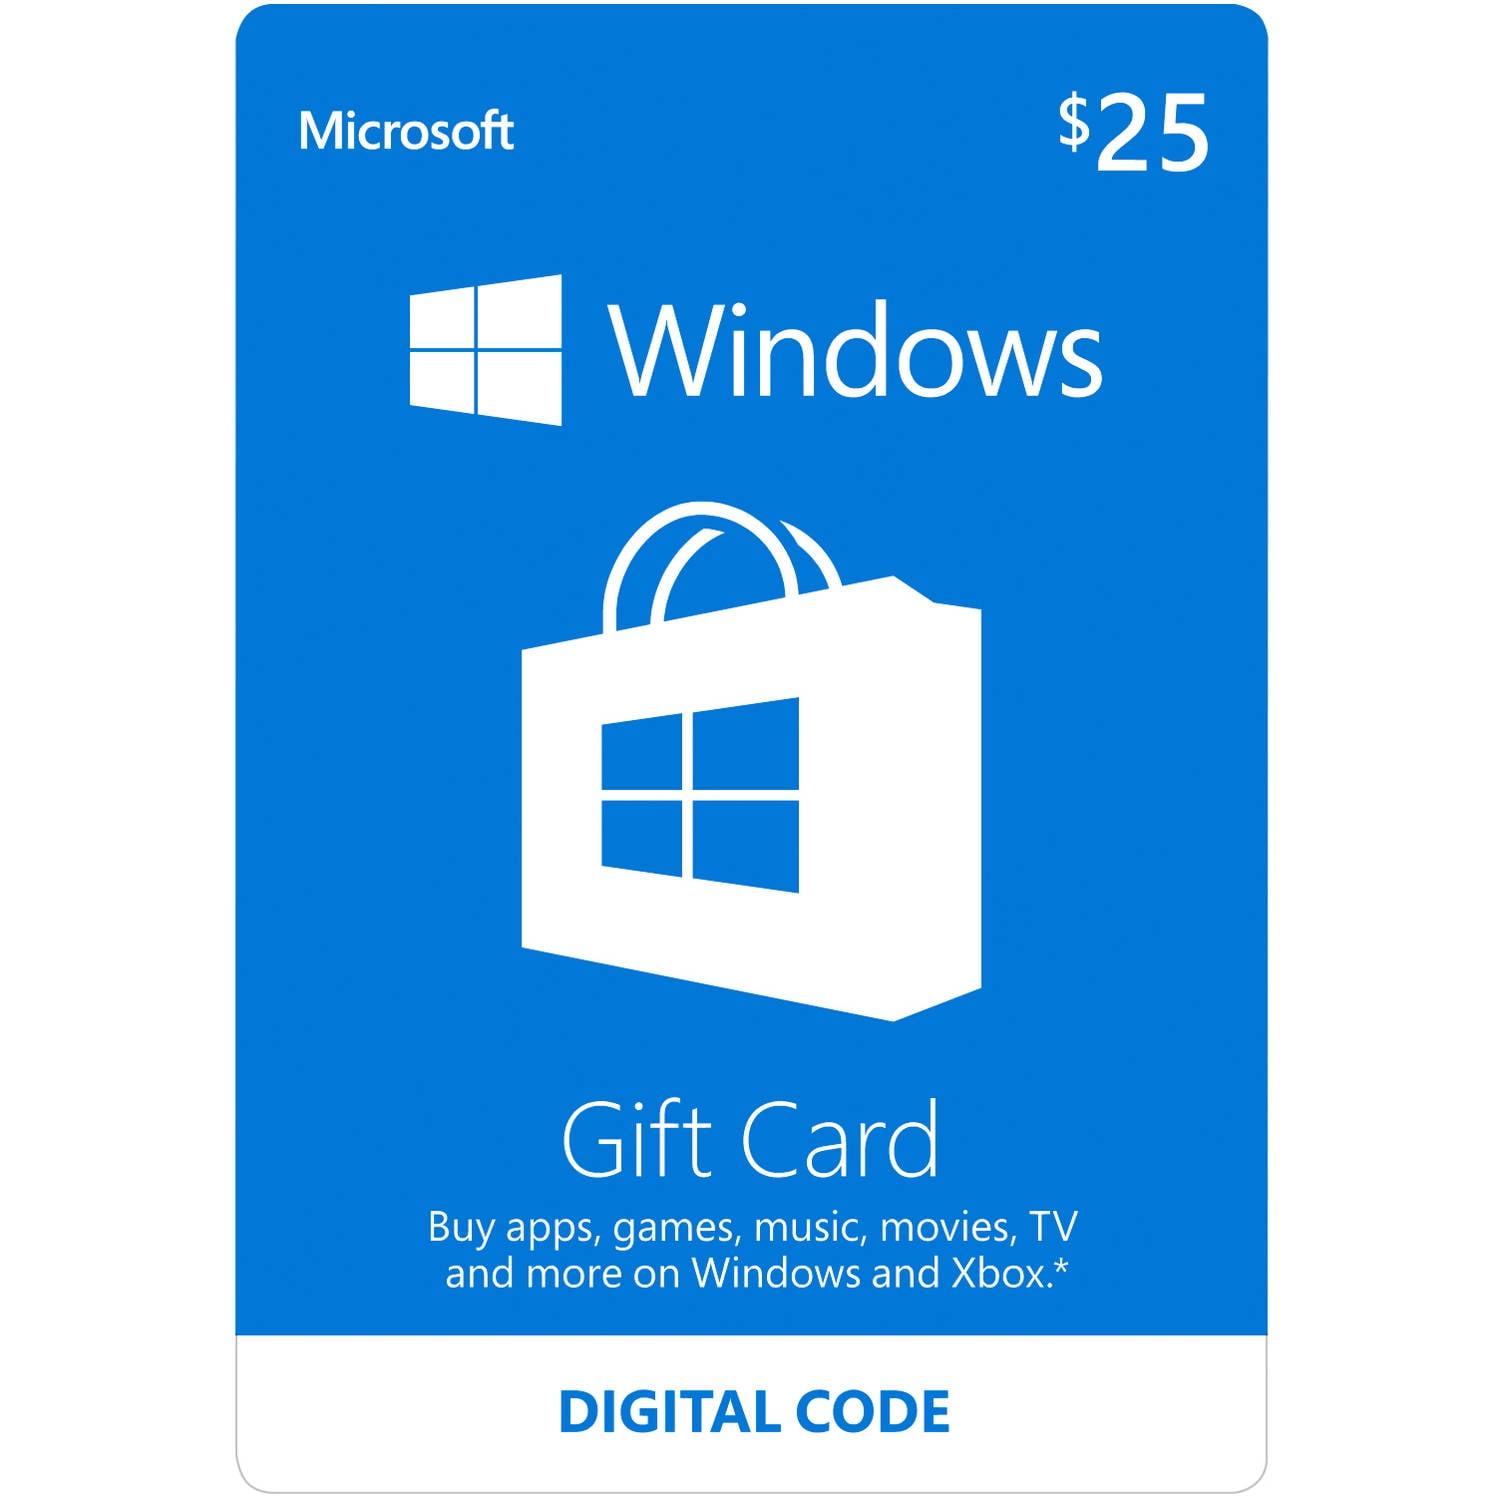 Gift Cards: Xbox Gift Cards for Gamers & More - Microsoft Store